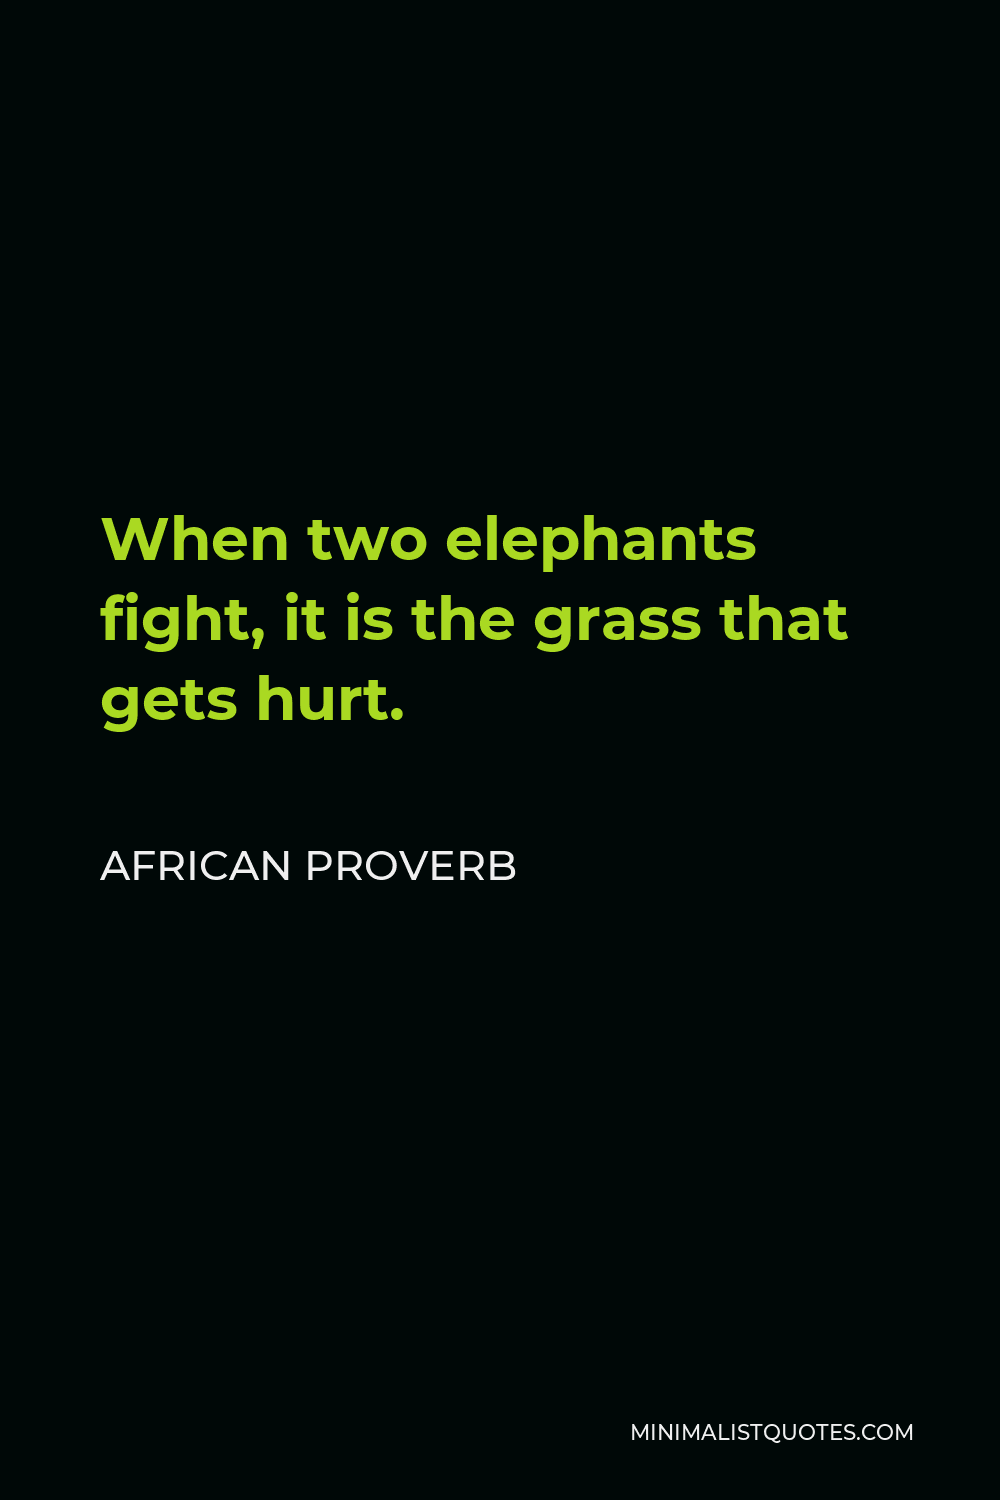 African Proverb Quote - When two elephants fight, it is the grass that gets hurt.